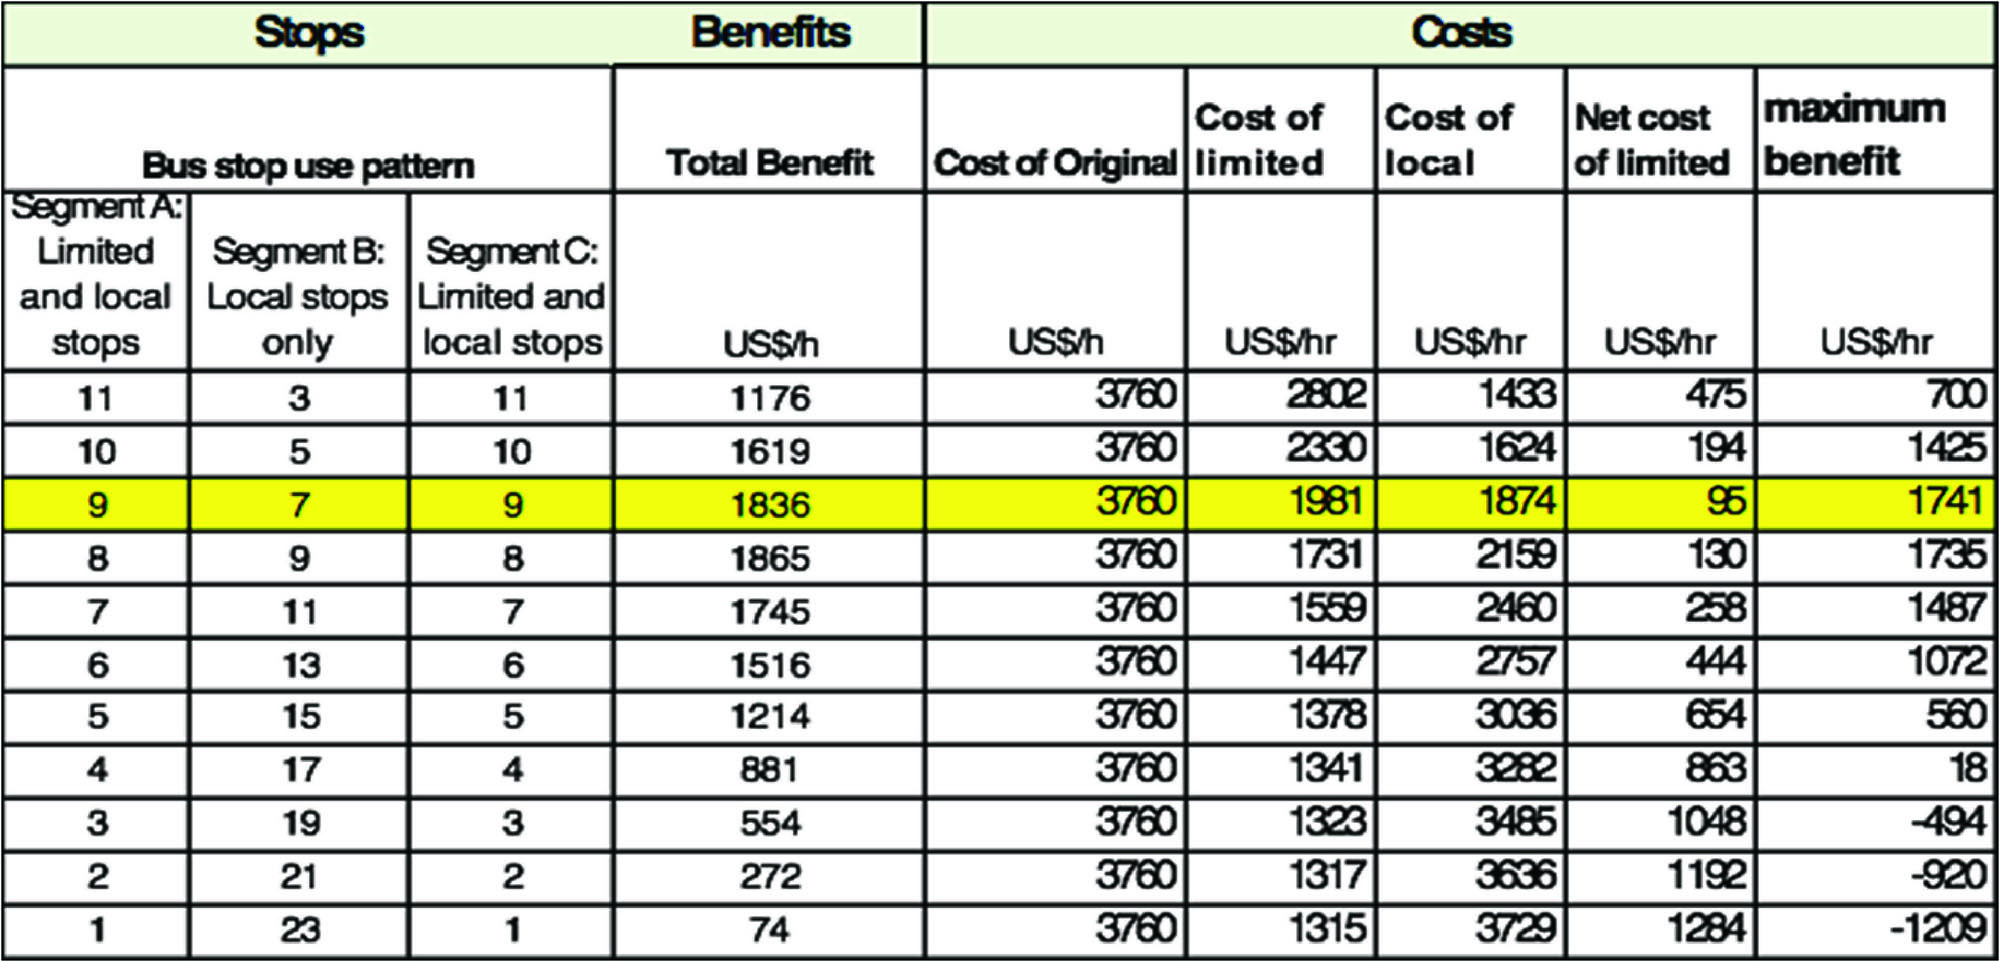 Table 6.38 Benefits Net of Costs for Varying Numbers of Eliminated Stops